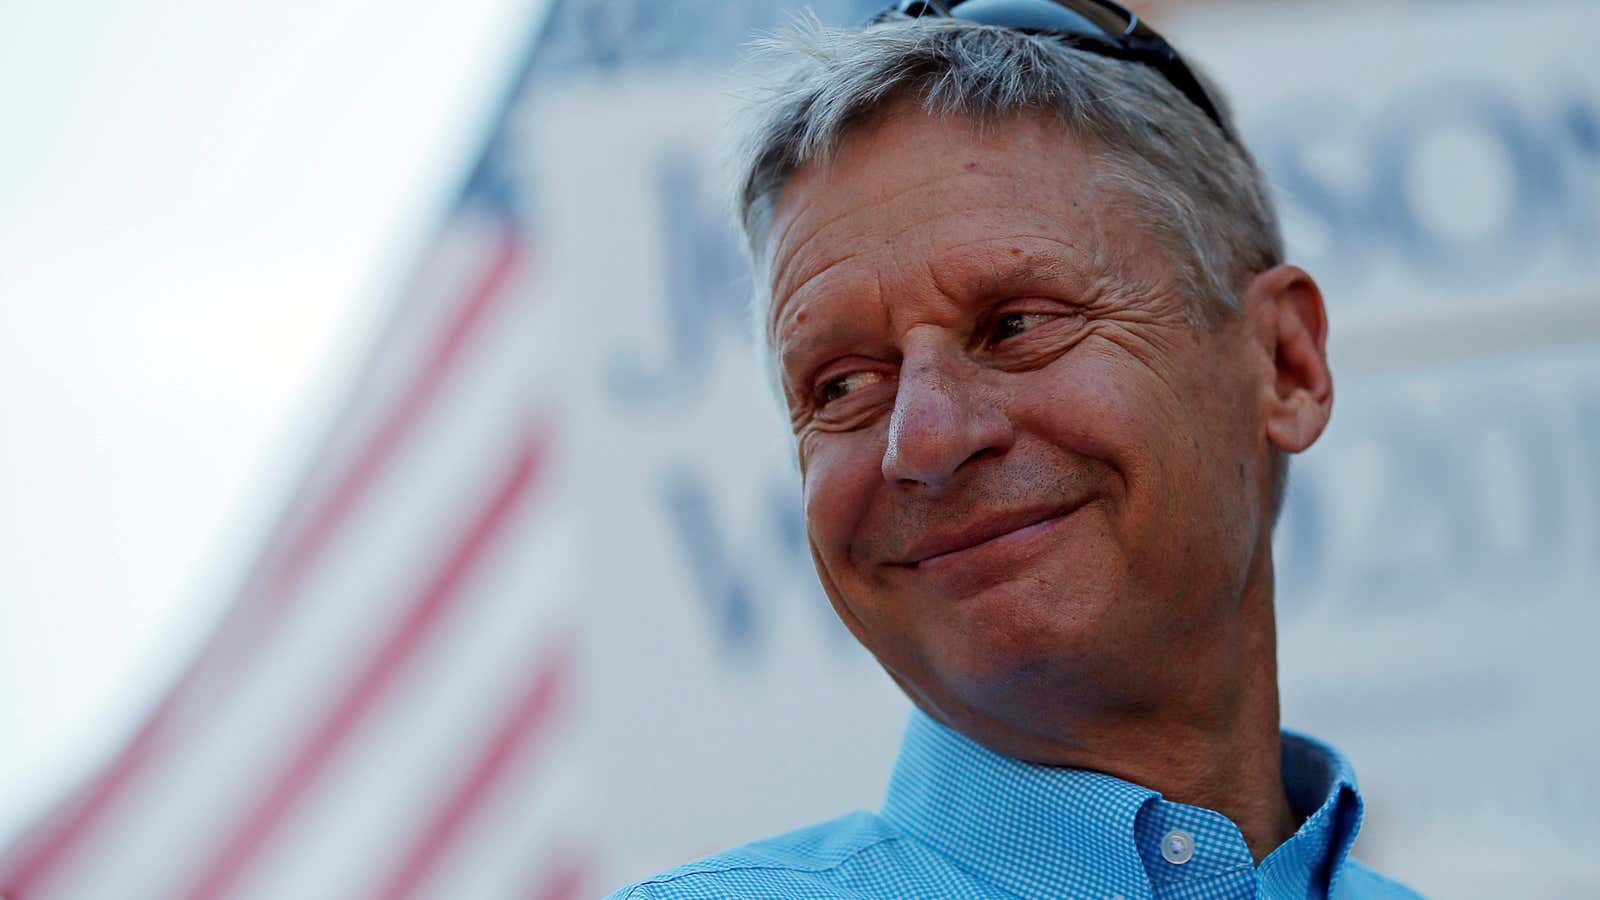 Libertarian presidential candidate Gary Johnson asks “What is Aleppo?” (Reuters/Brian Snyder)